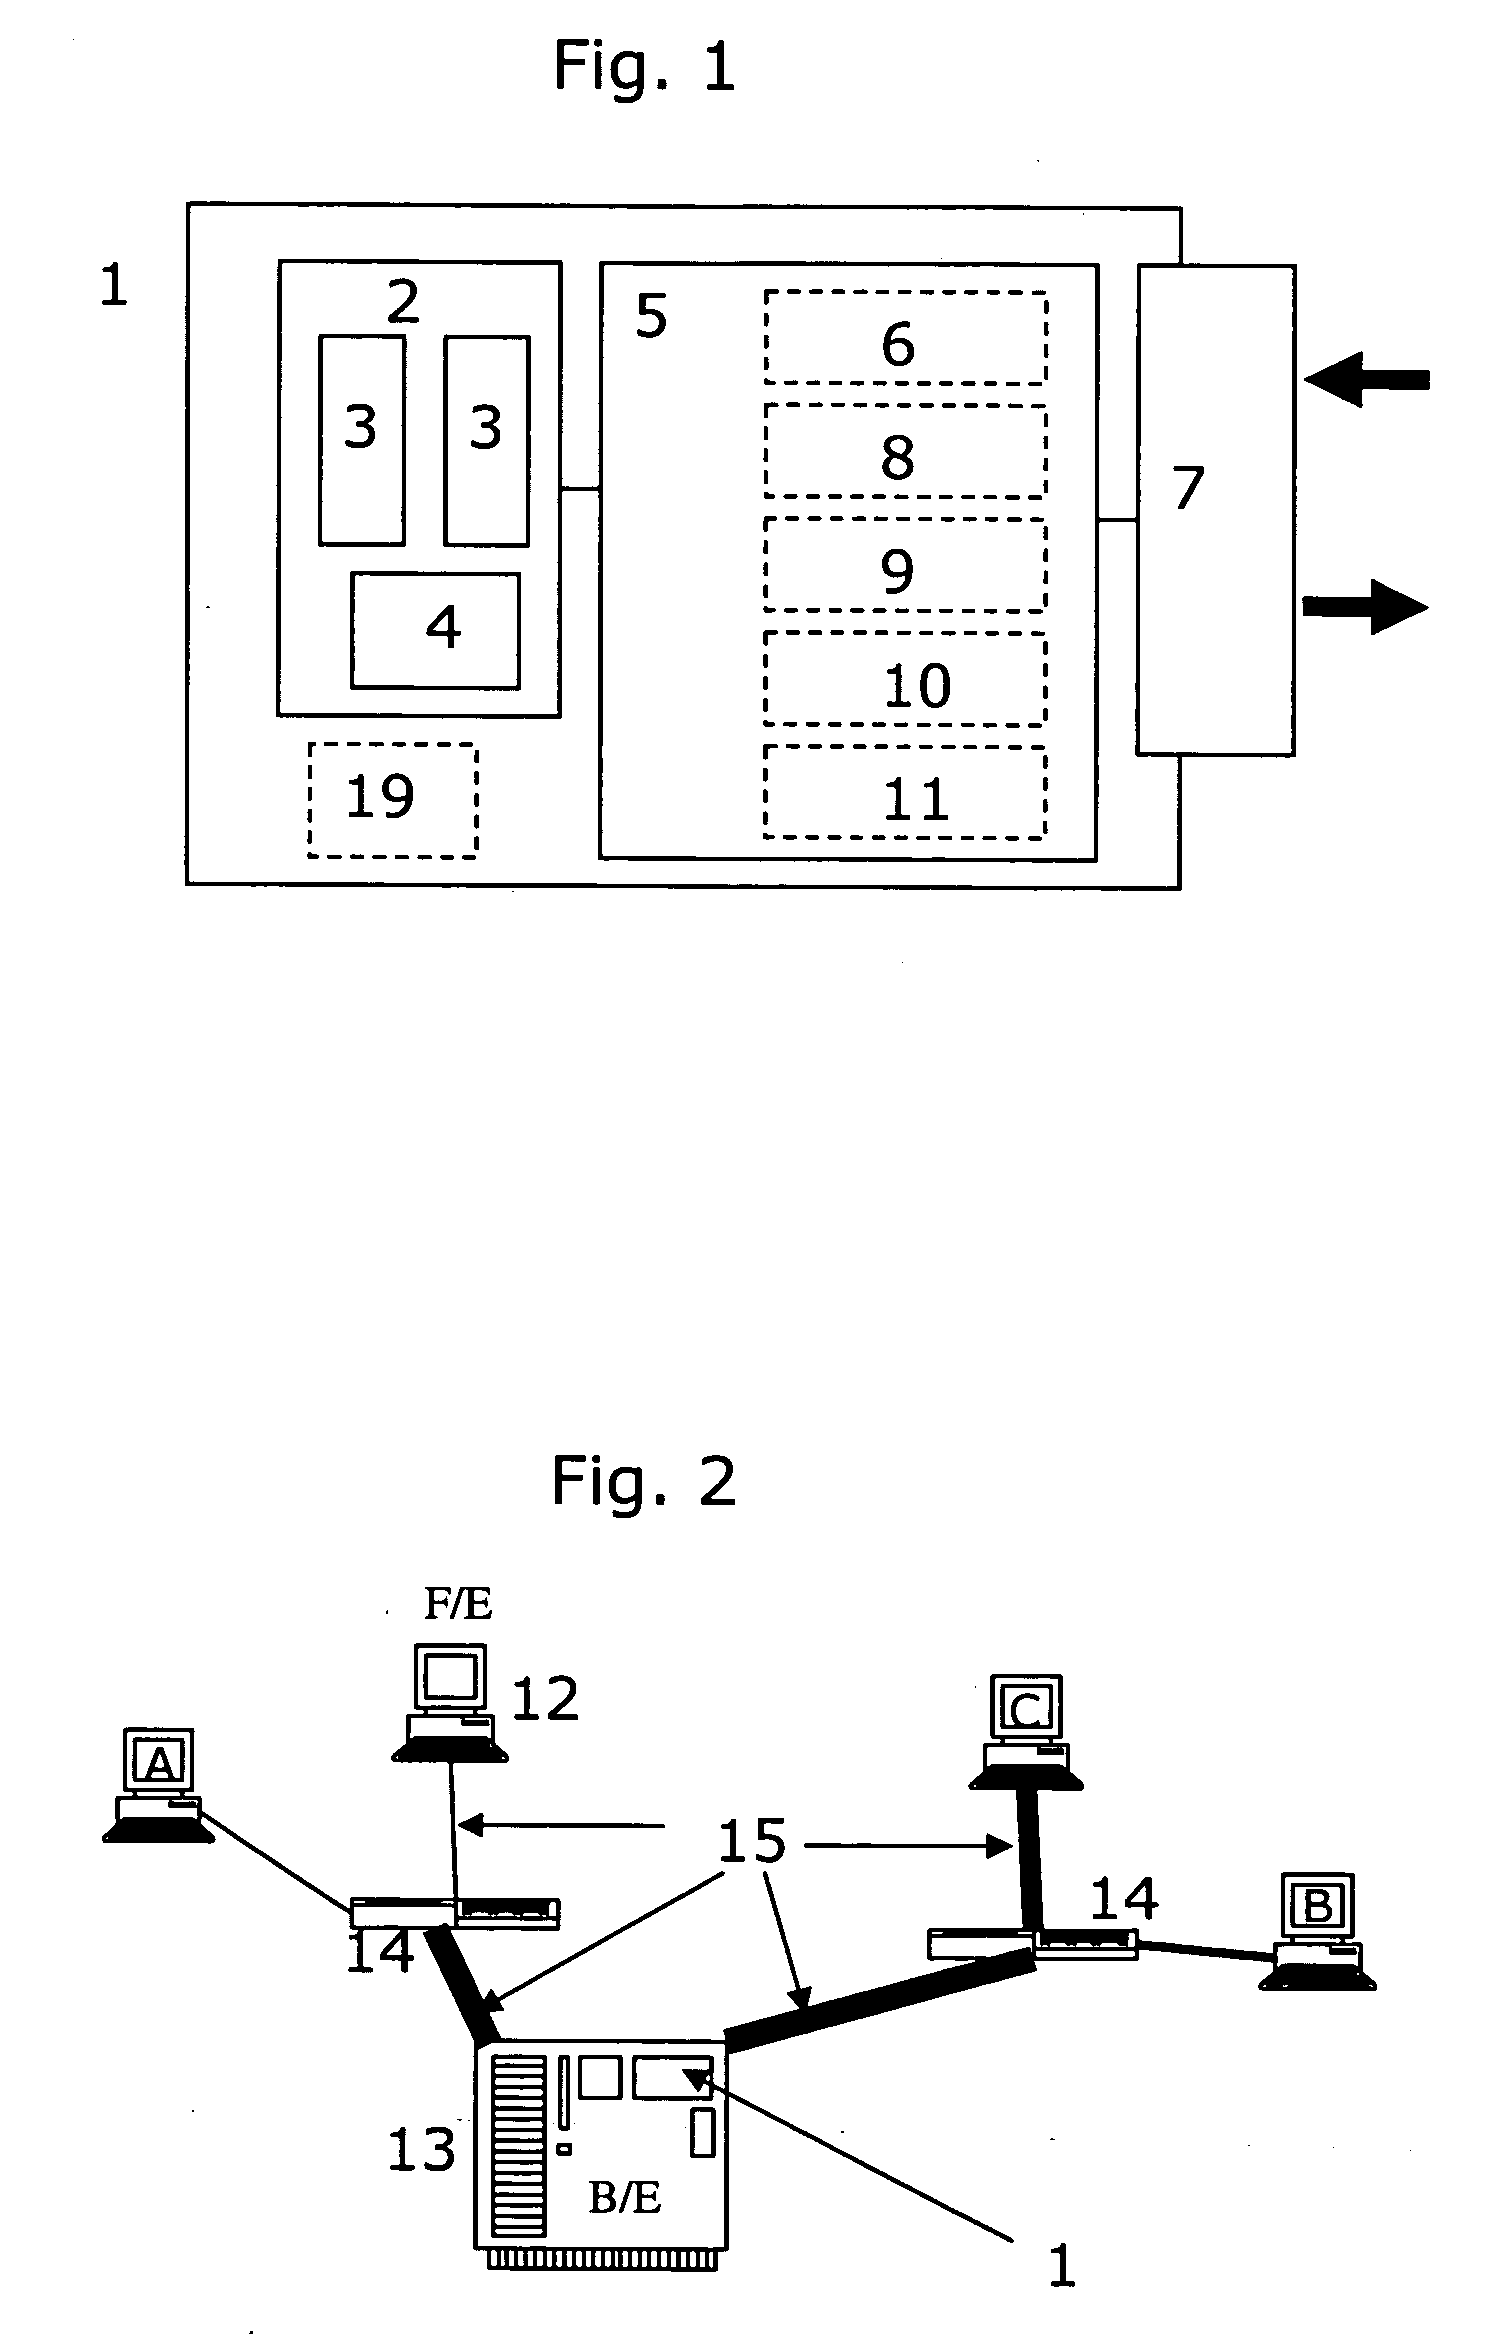 System and method for adaptive information dissemination